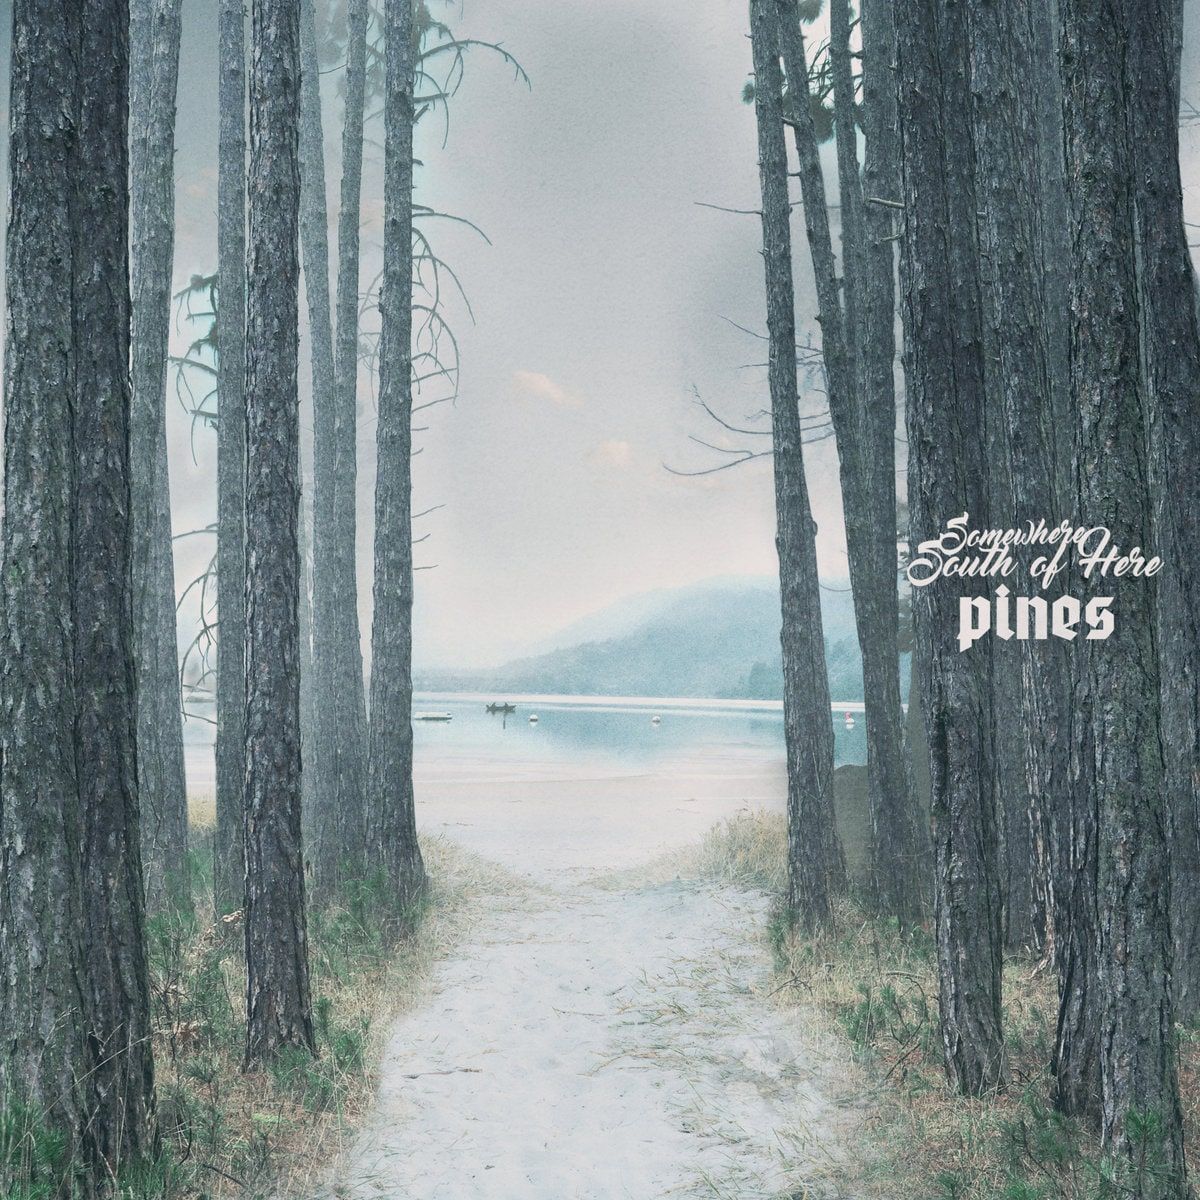 Somewhere South of Here - Pines